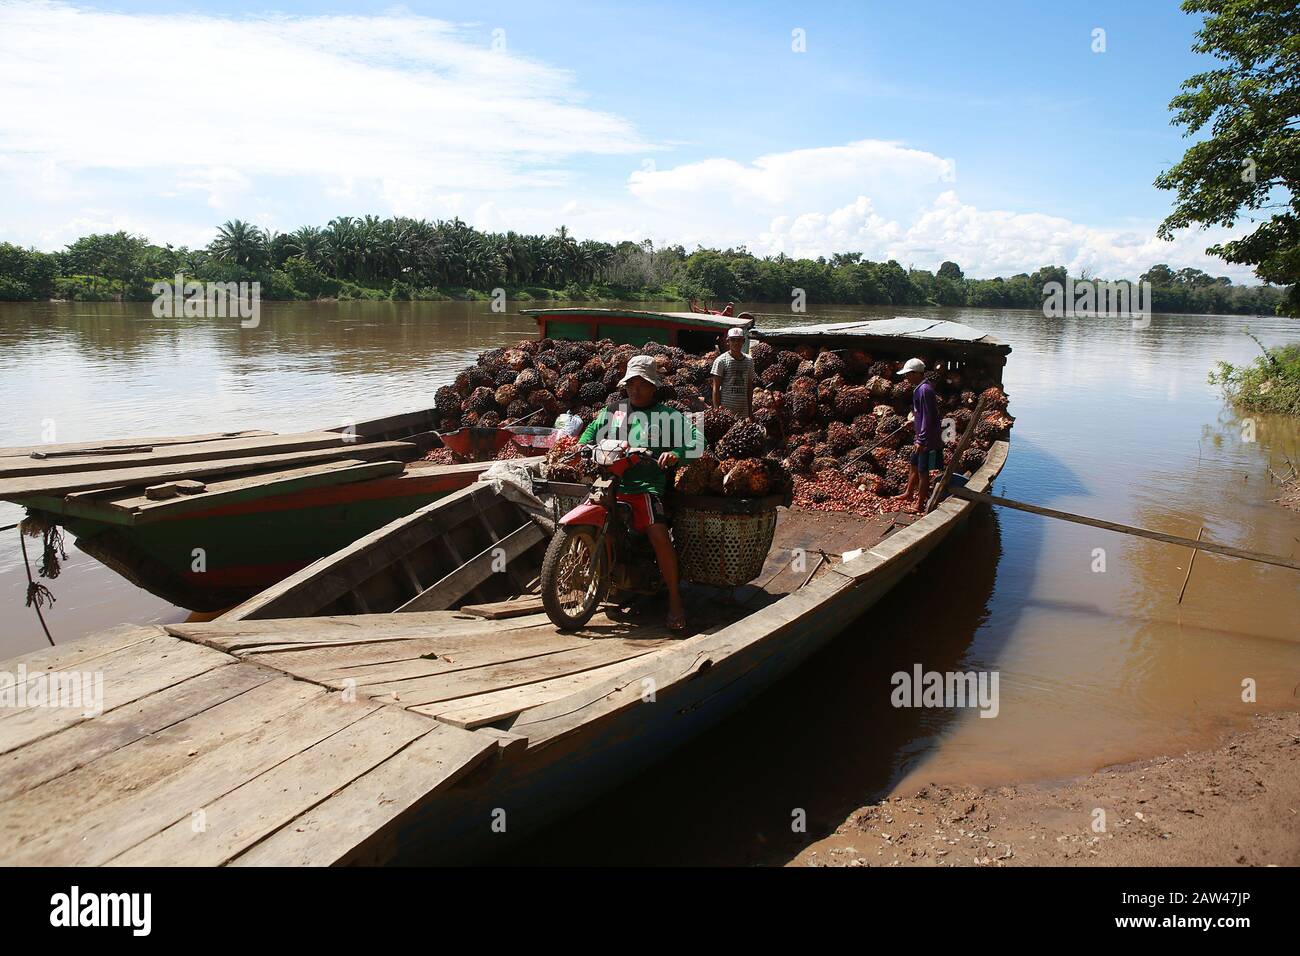 Workers seen moving palm oil harvests from boats in the Musi River Sanga sub-district, Musi Banyuasin District Village, South Sumatra, Indonesia, on April 14, 2019. Farmers complain that low oil palm prices do not reach Rp. 2000 percent, this has an impact on the farmers' economy. Stock Photo